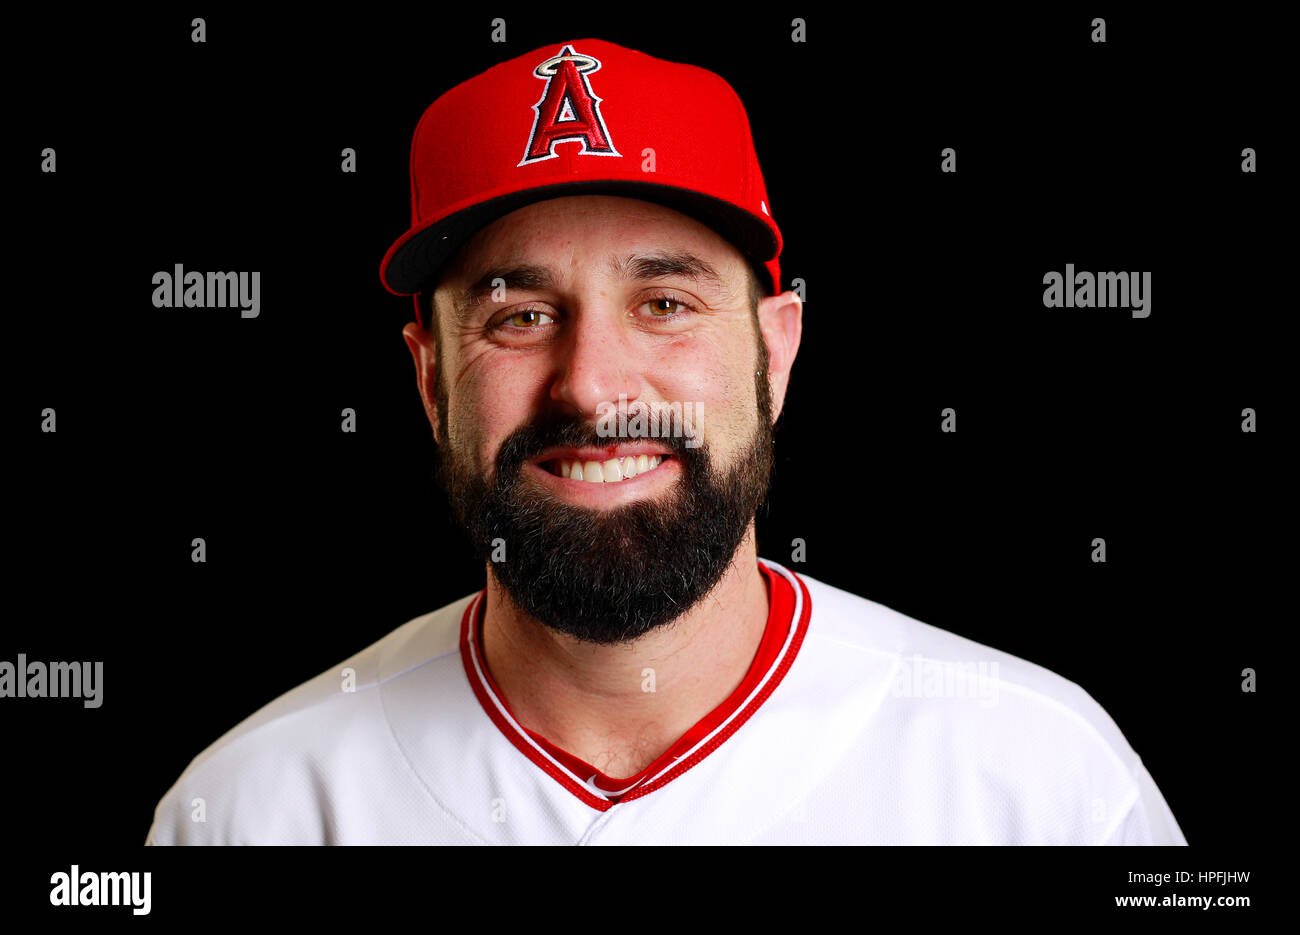 Angels Live: Matt Shoemaker provides shoes to kids in need